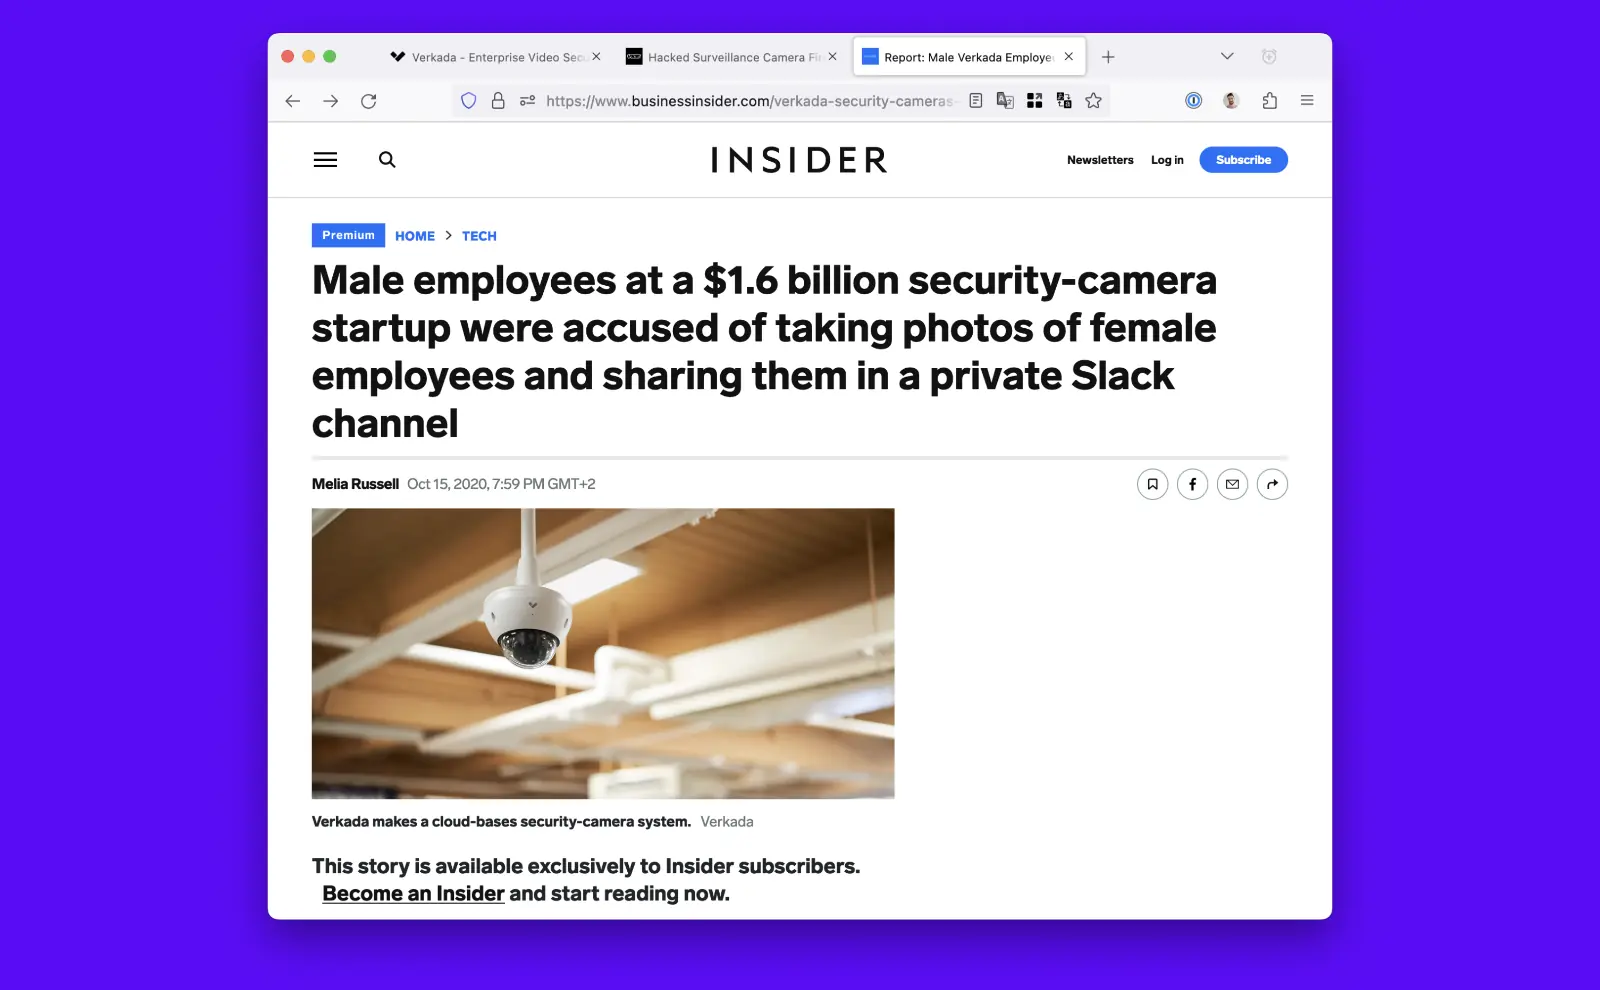 Screenshot of Business Insider article. Male employees at a $1.6 billion security-camera startup were accused of taking photos of female employees and sharing them in a private Slack channel